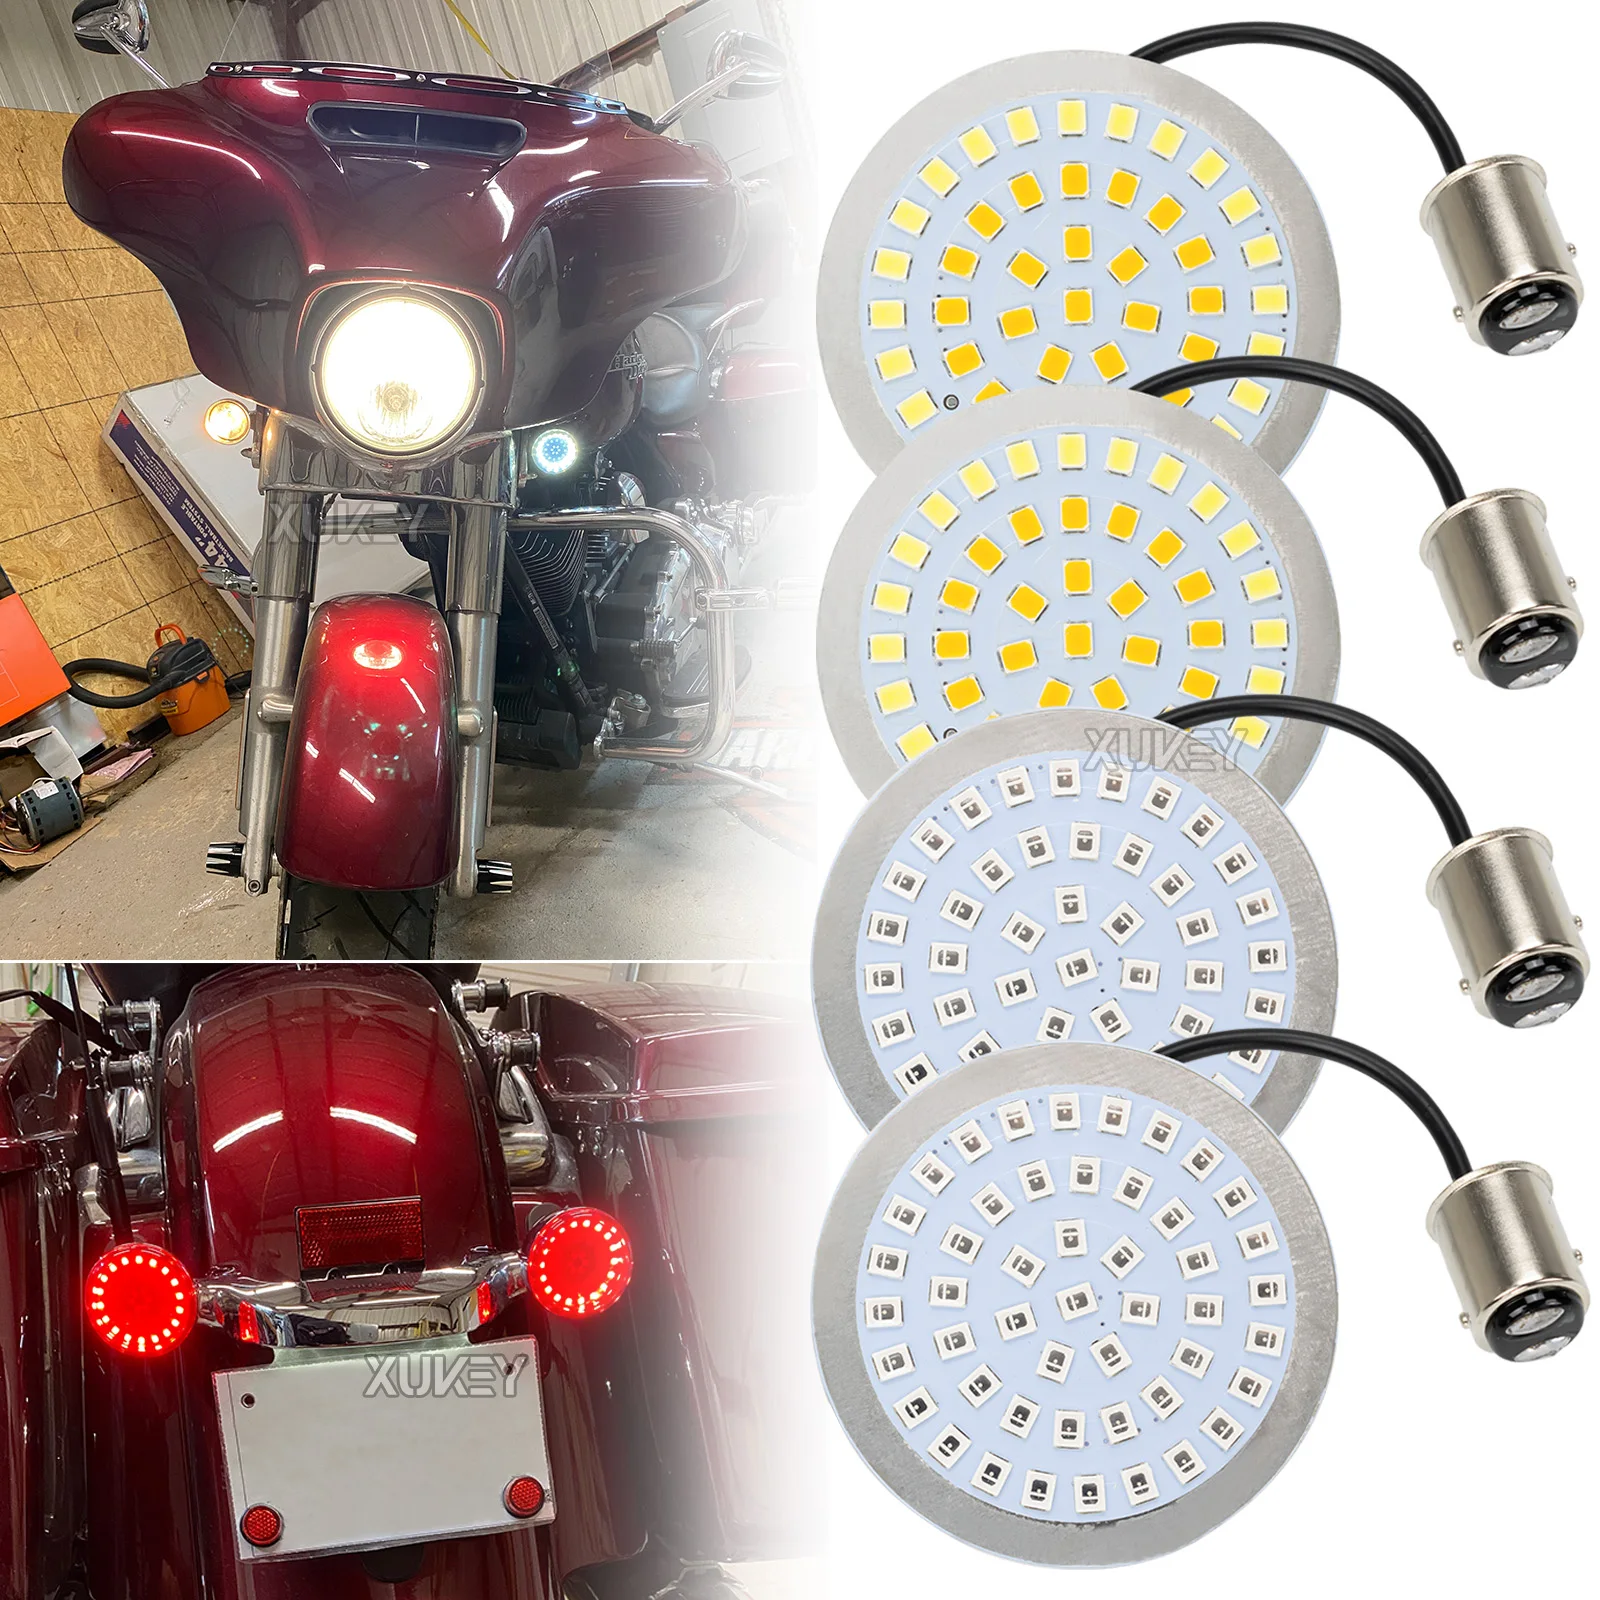 

2" 1157 Front Rear Turn Signal Indicator Light Kit with Smoke Lens Cover for Harley Dyna Softail Touring Sportster Tri Glide